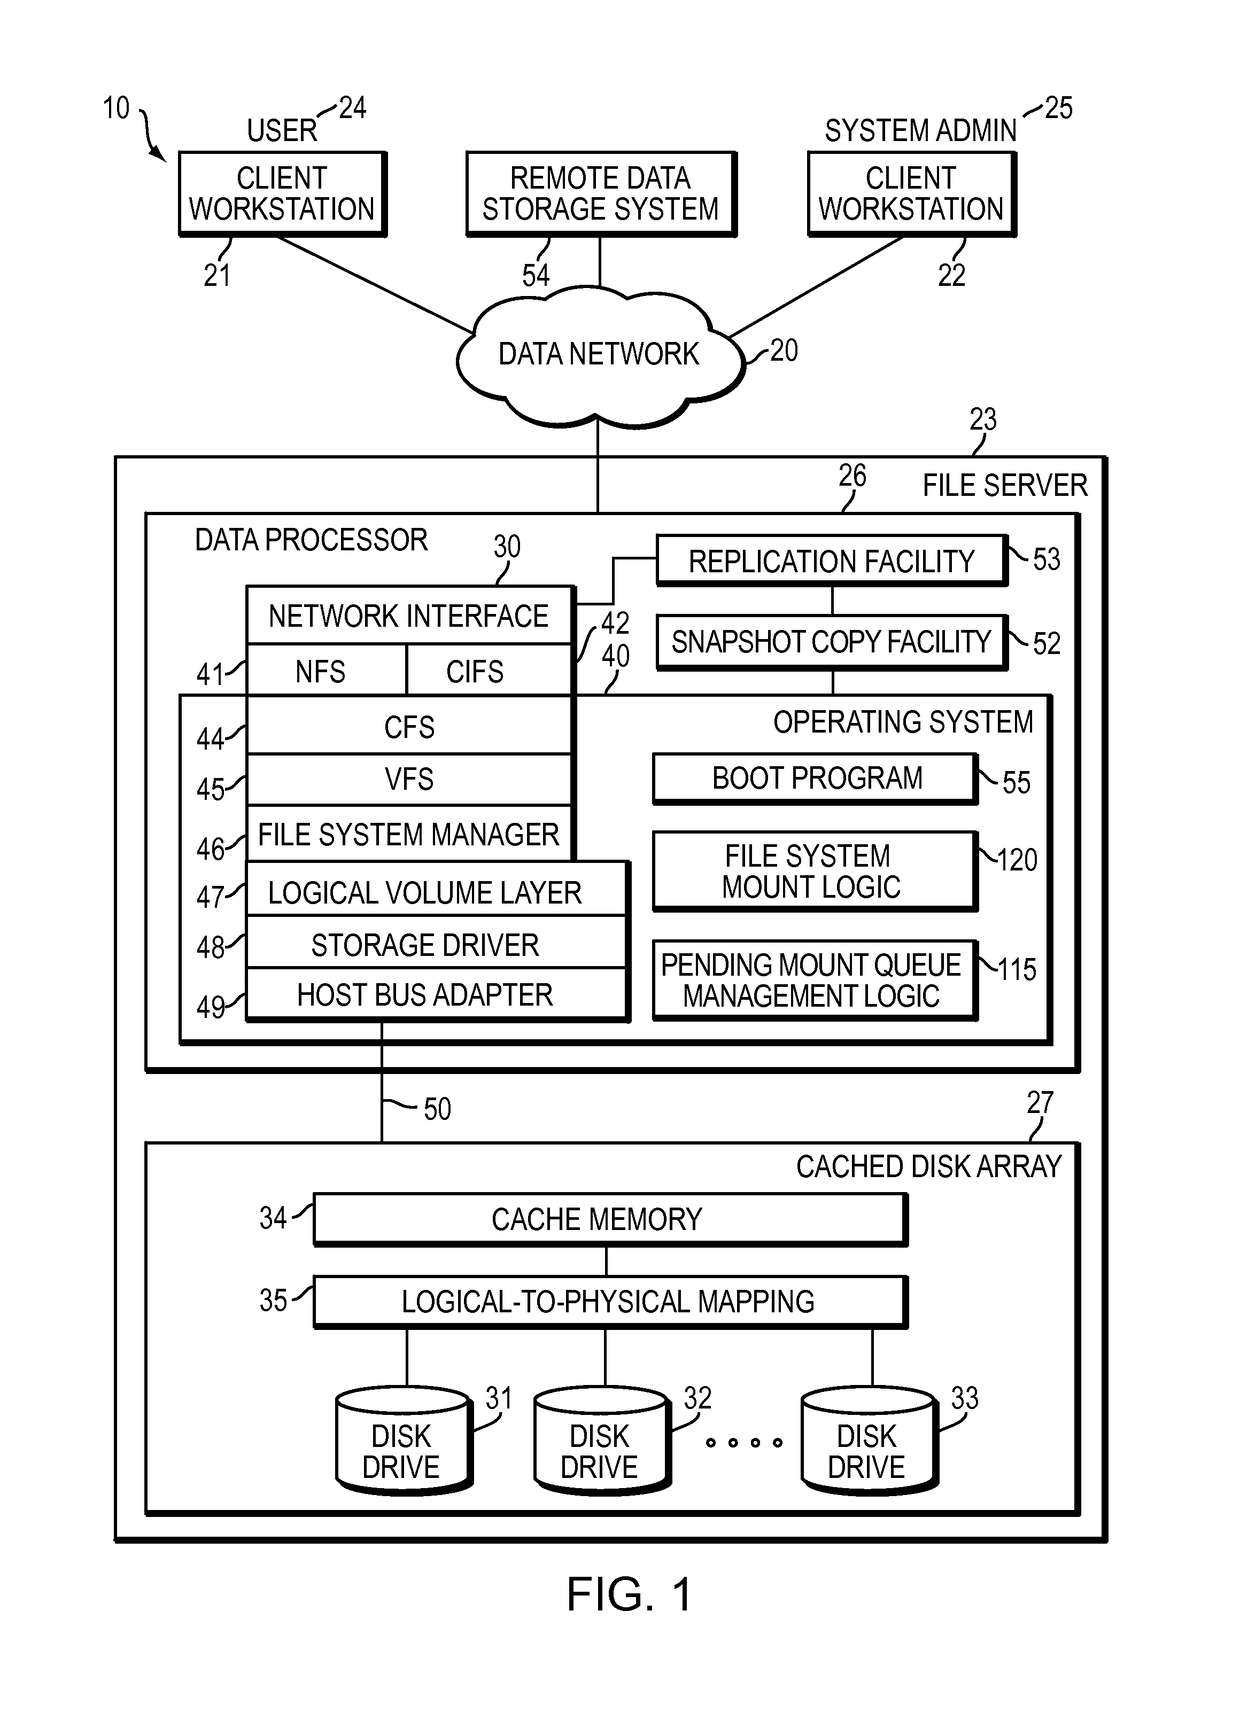 Managing mounting of file systems